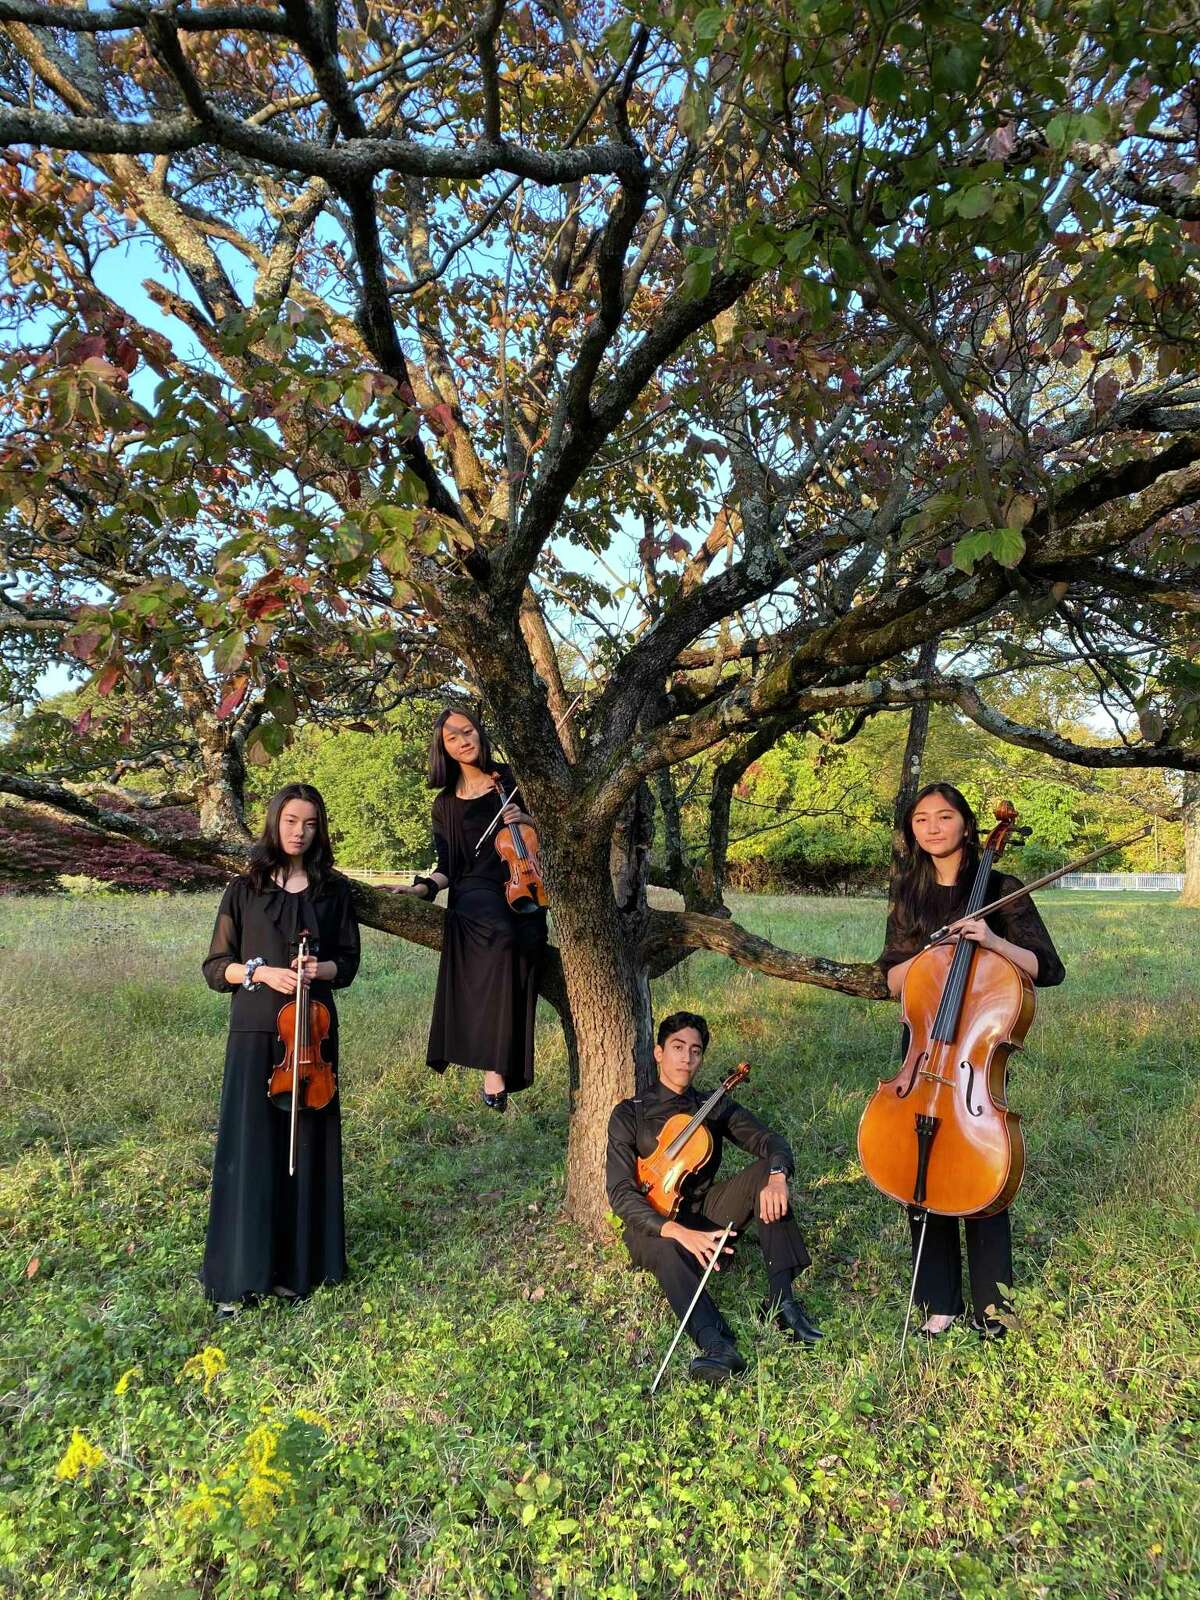 The Con Fuoco String Quartet performed at the Mather Homestead Oct. 4.